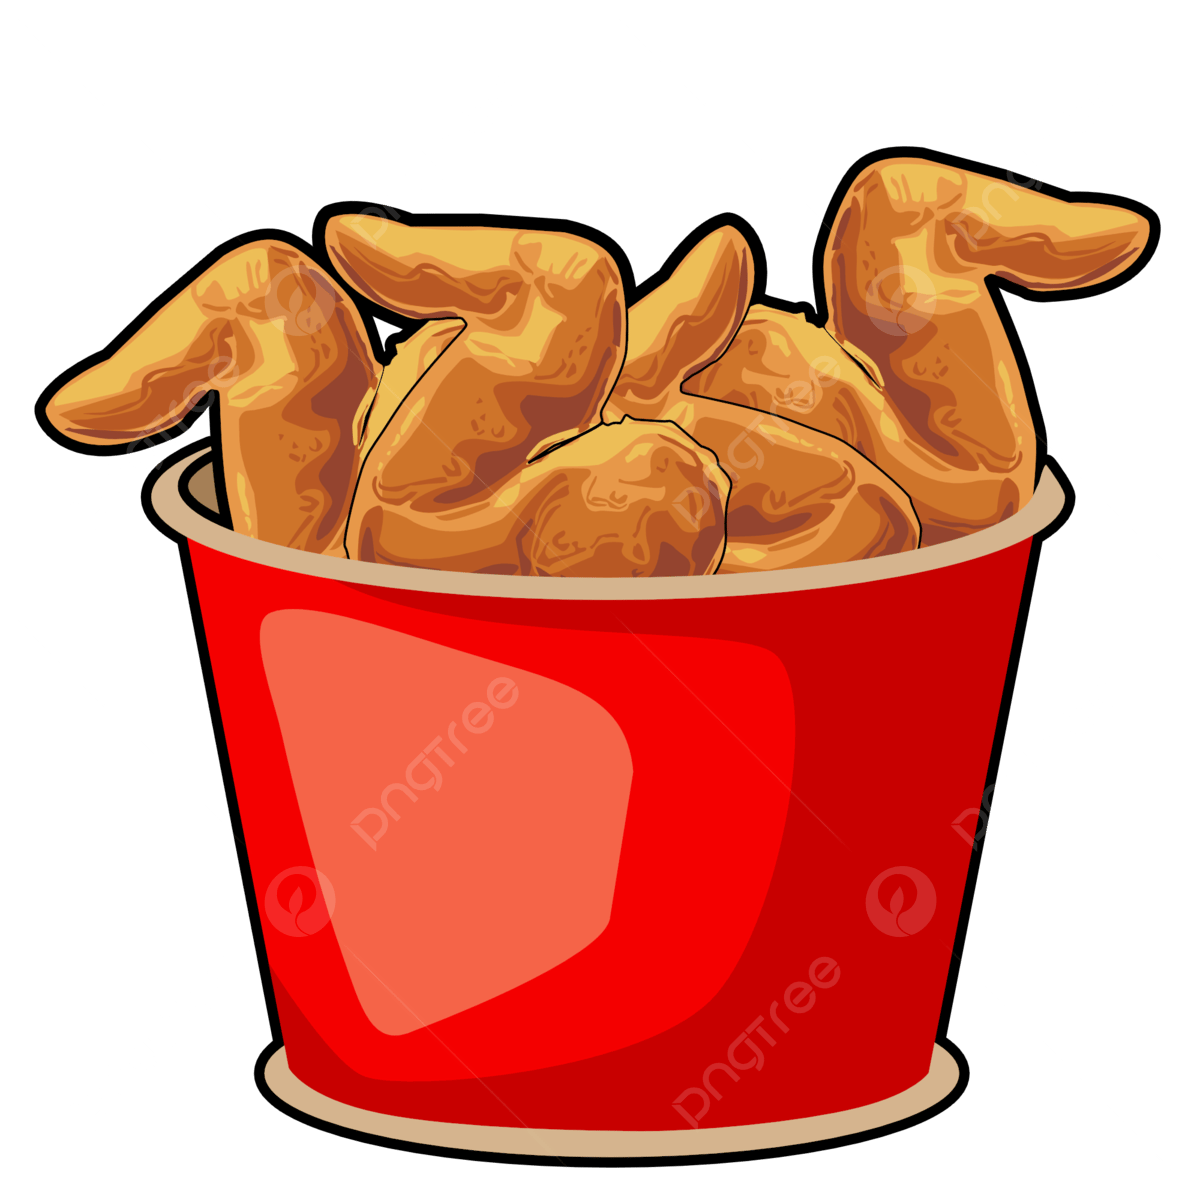 Chicken Wing PNG Image